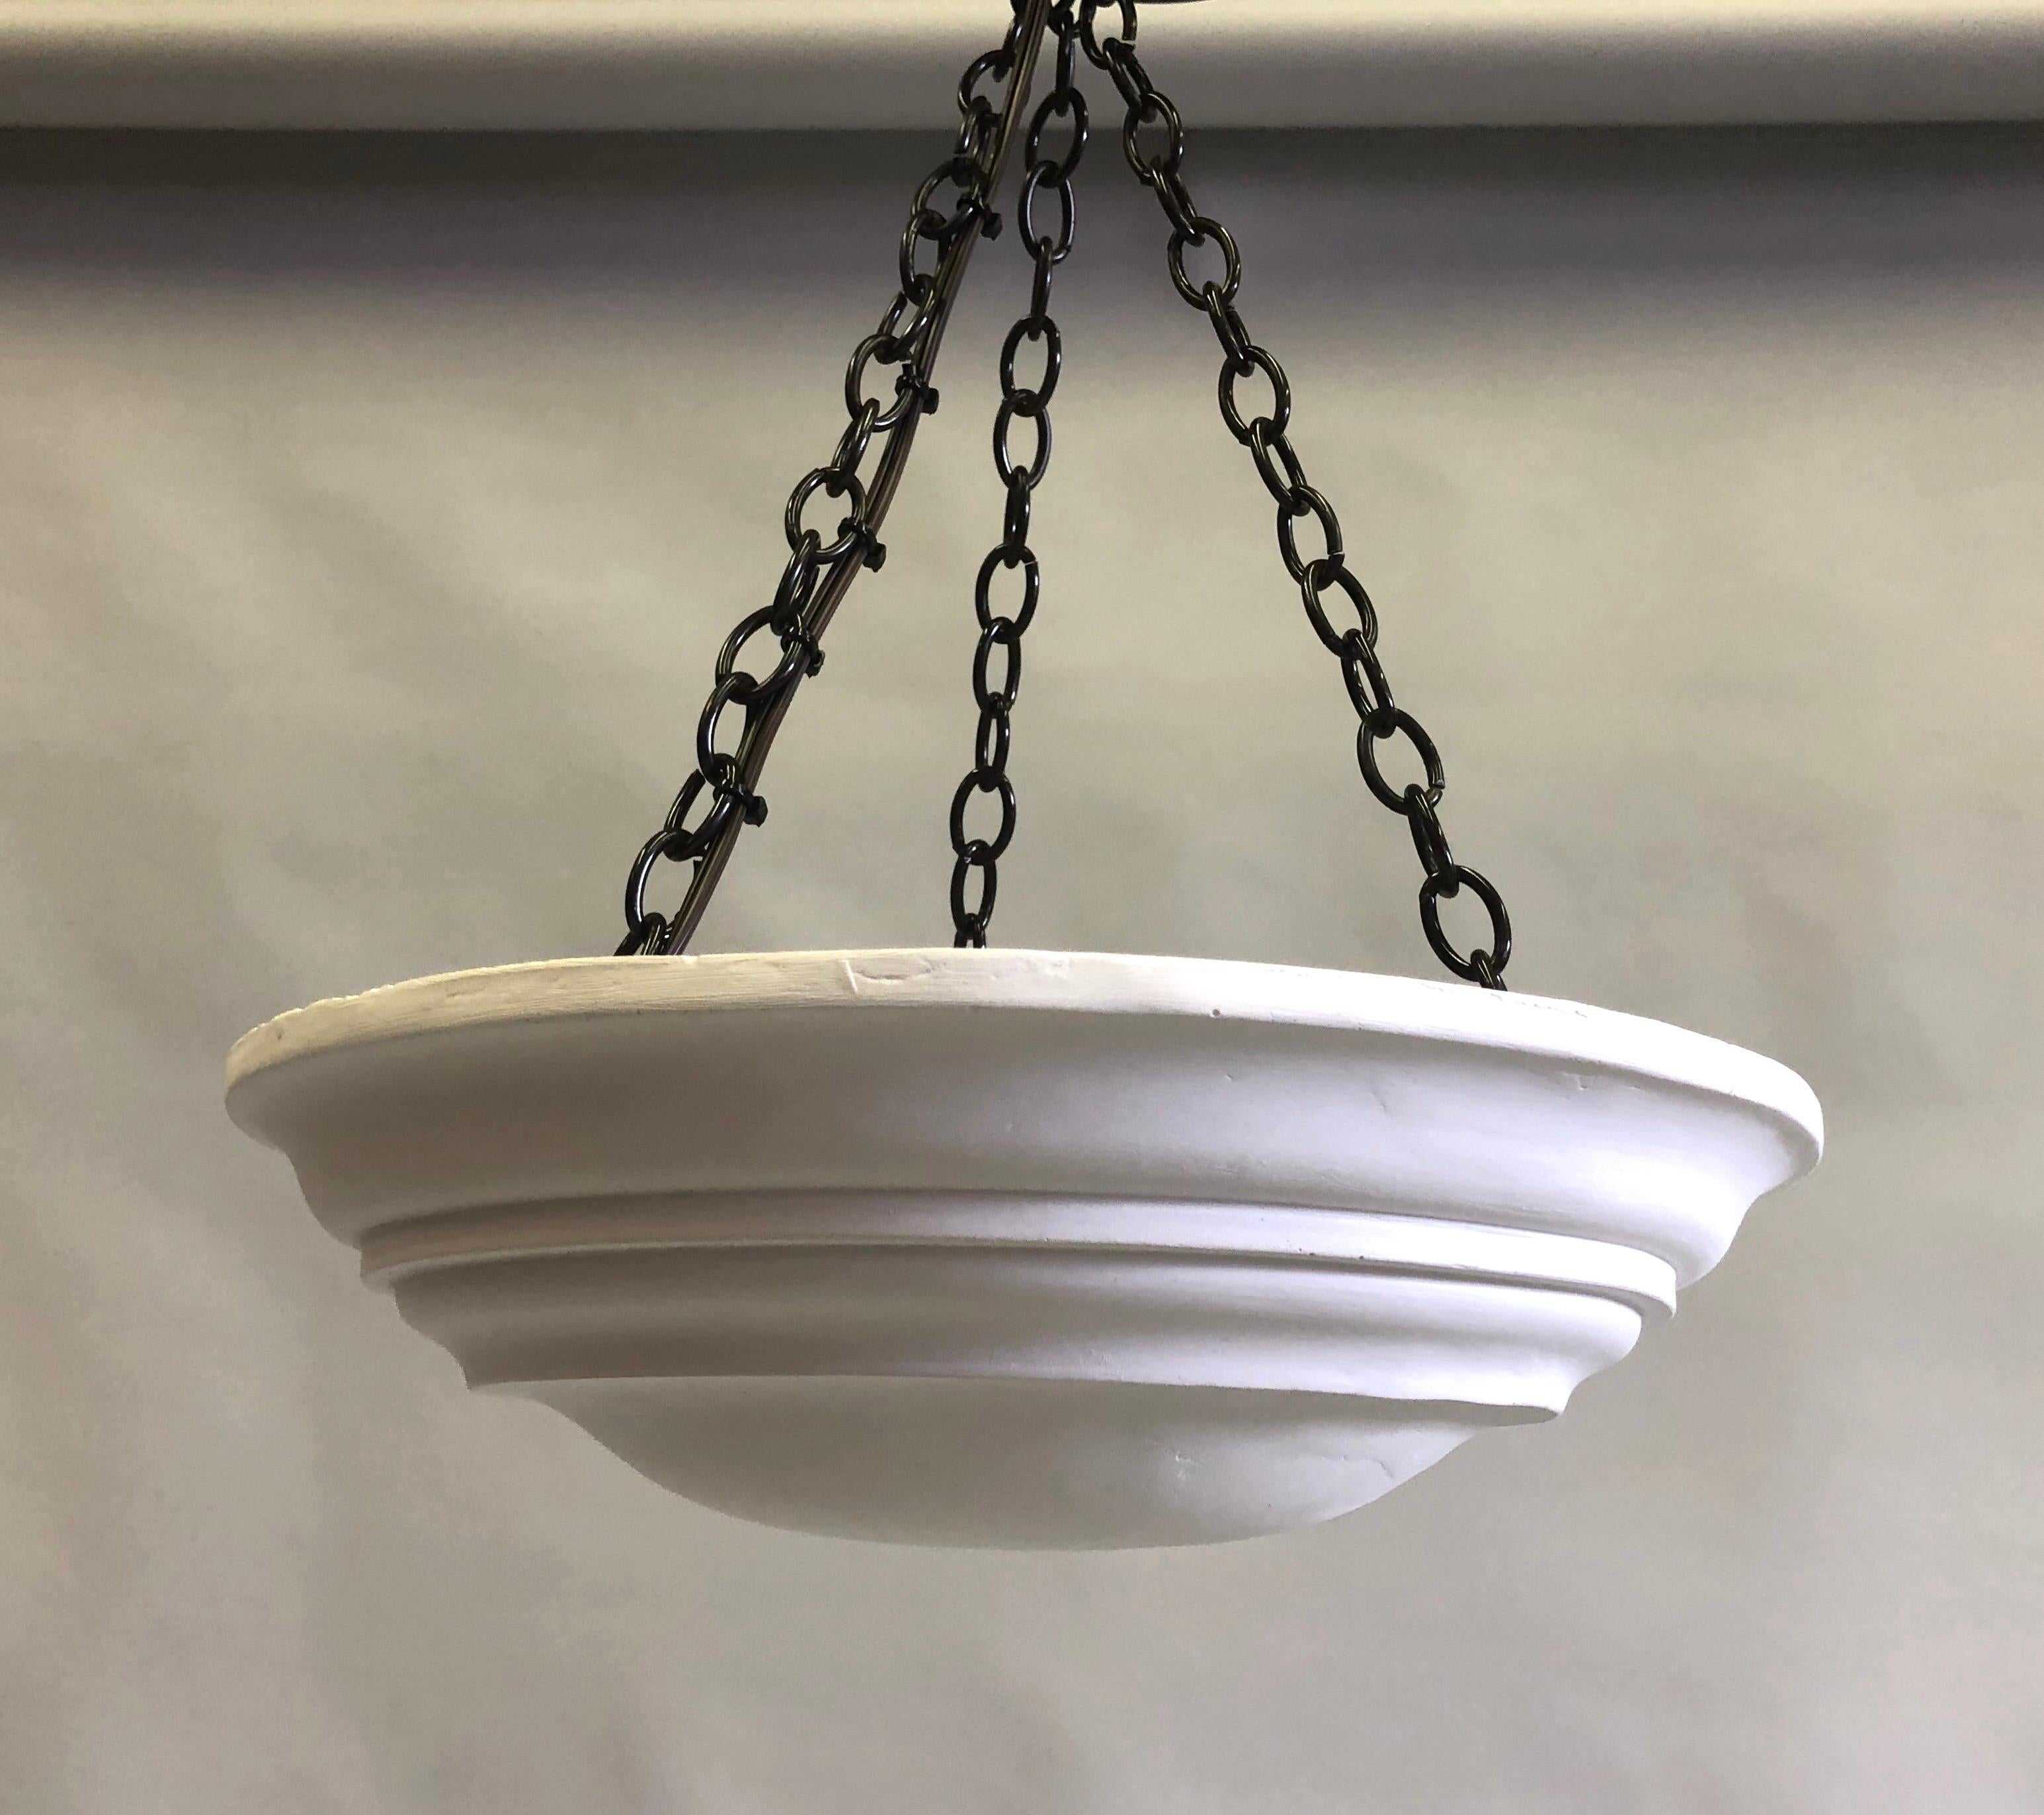 2 French Modern Neoclassical Plaster Pendants / Flush Mounts, Jean-Michel Frank In Good Condition For Sale In New York, NY